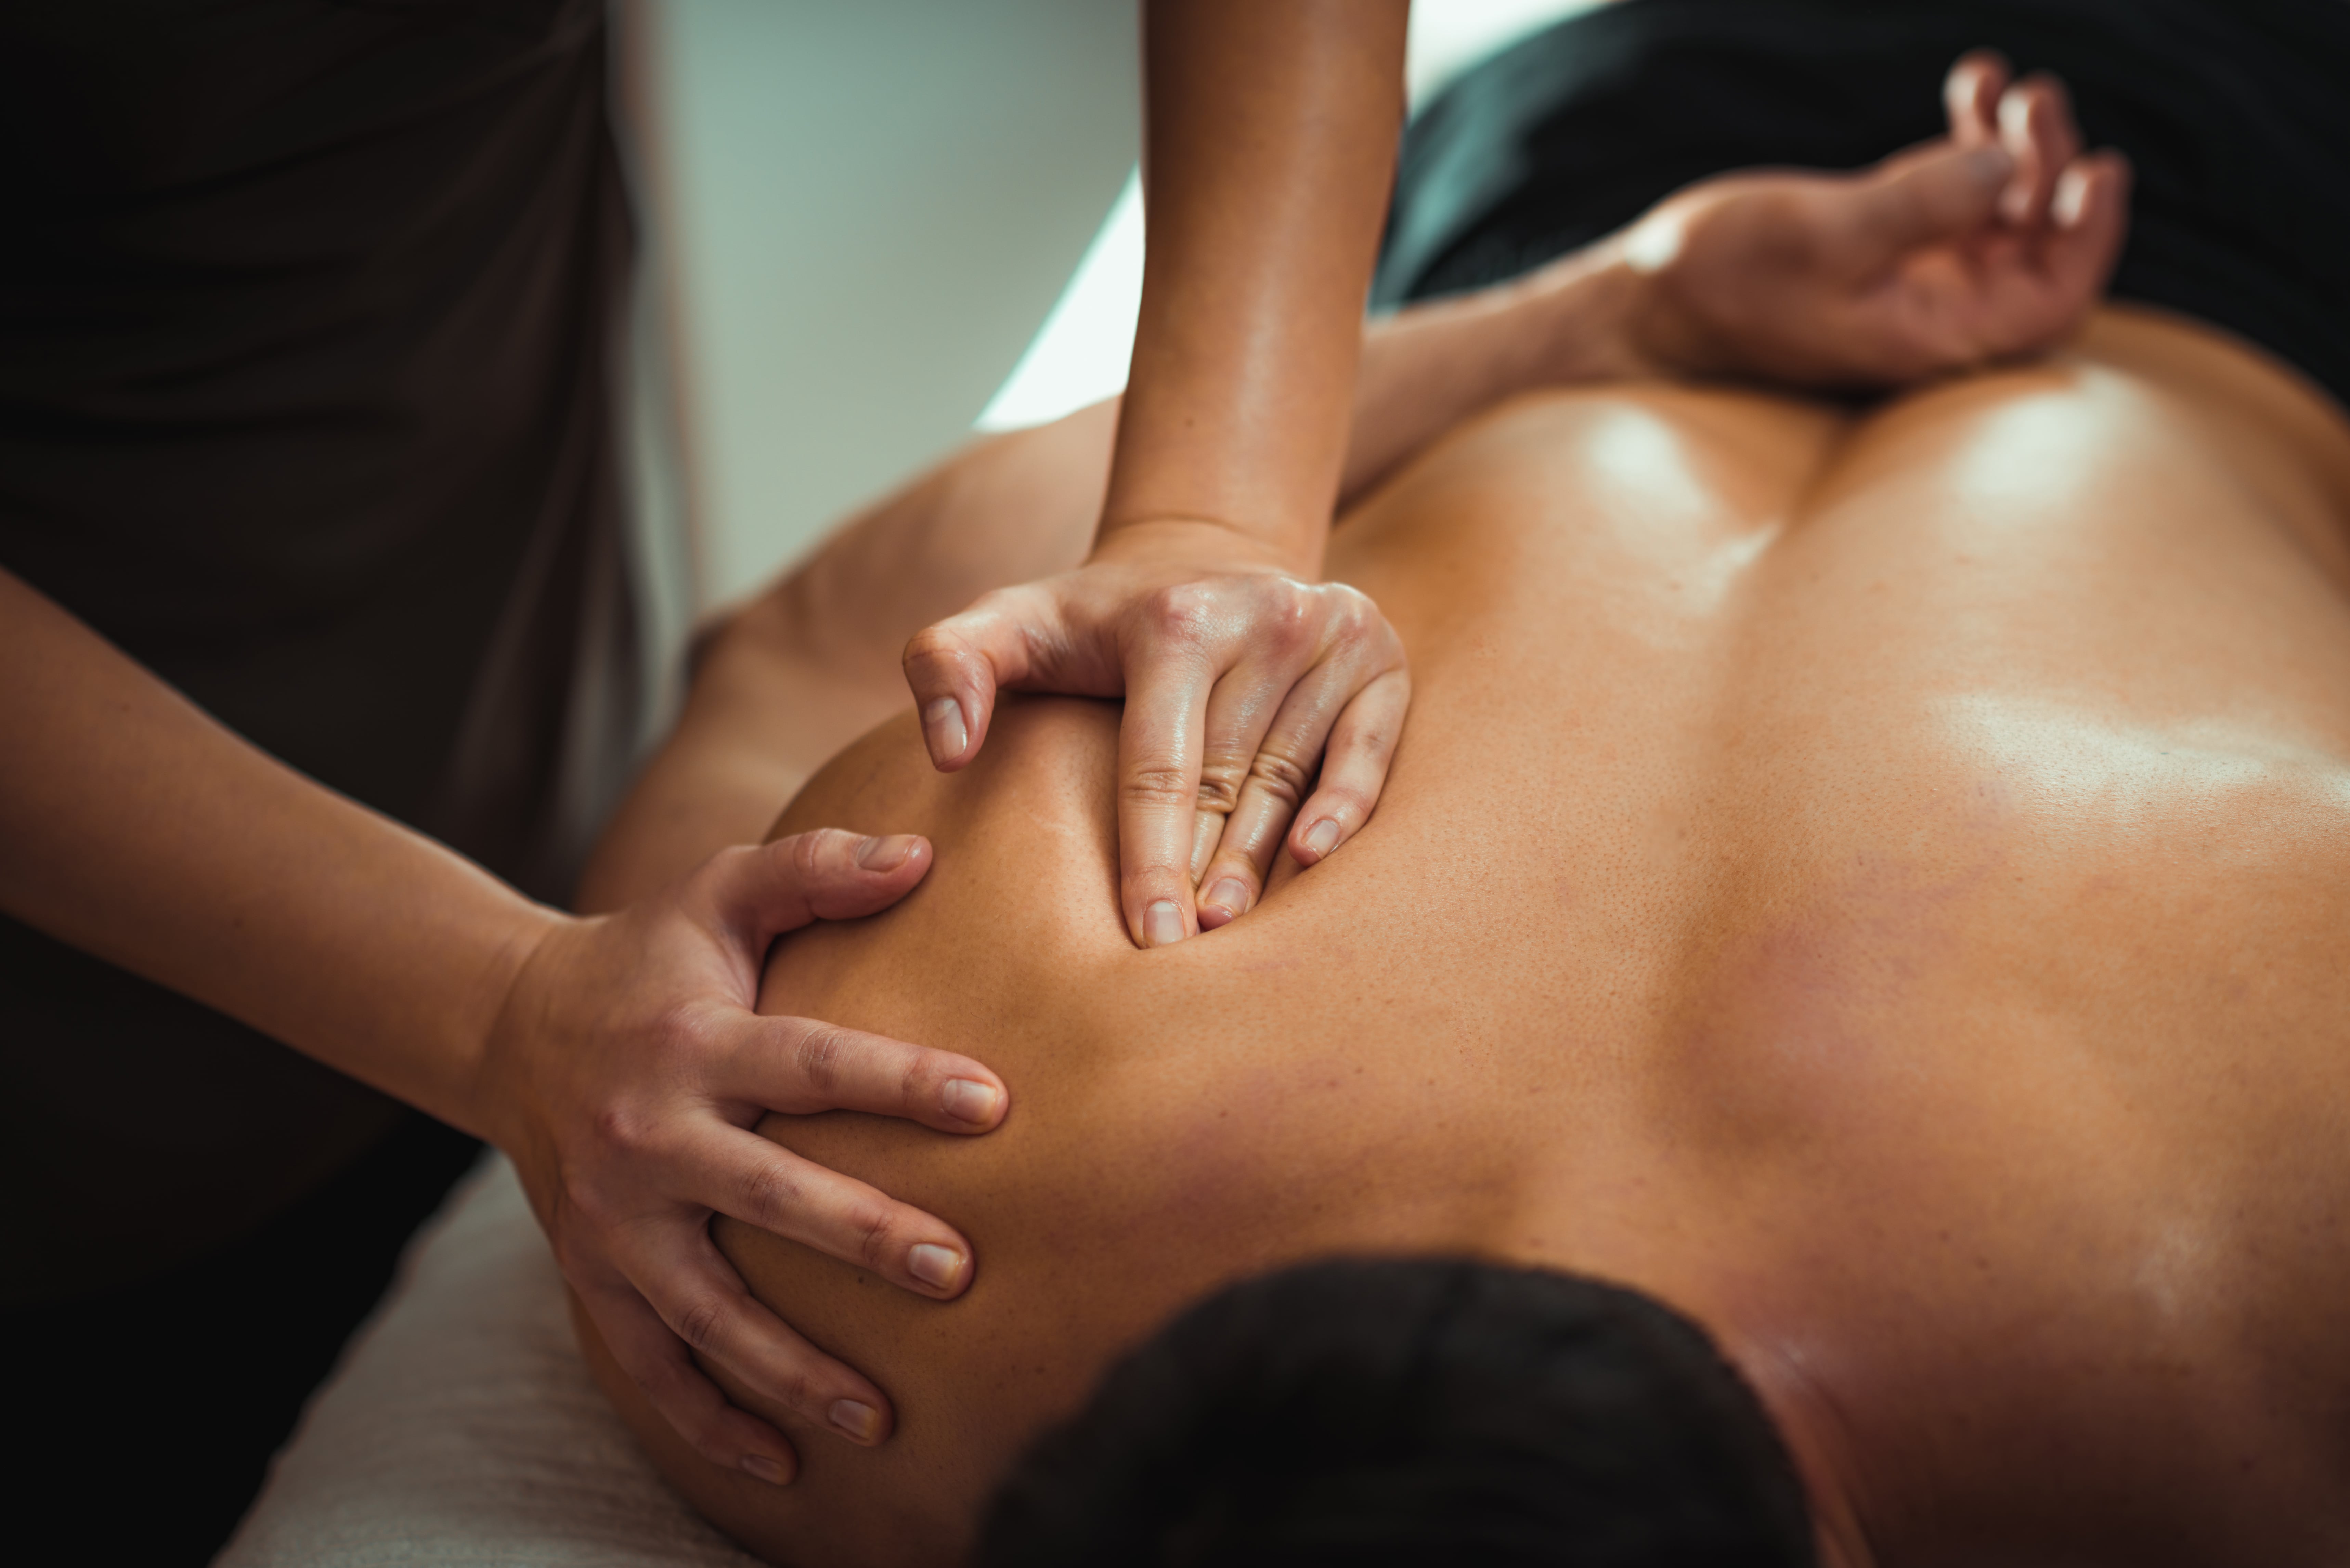 About us, we do massage. Here is a Young man receiving chiropractic massage therapy. There are many healing benefits of massage. Scapula shoulder massage to improve movement.